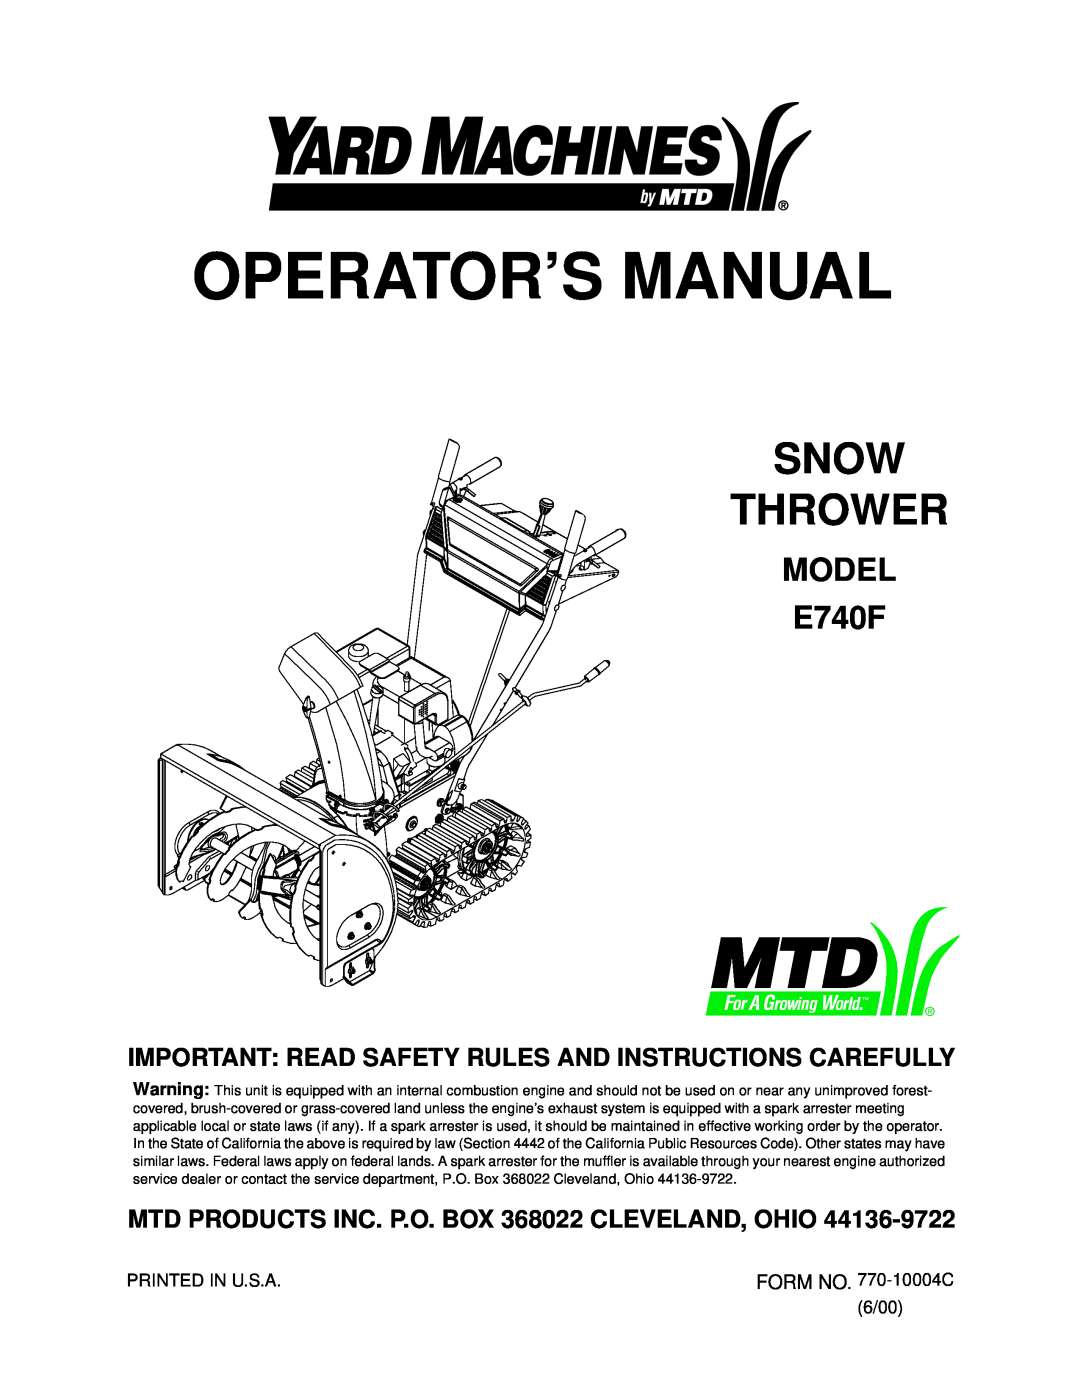 MTD manual Operator’S Manual, Snow Thrower, MODEL E740F, Important Read Safety Rules And Instructions Carefully 